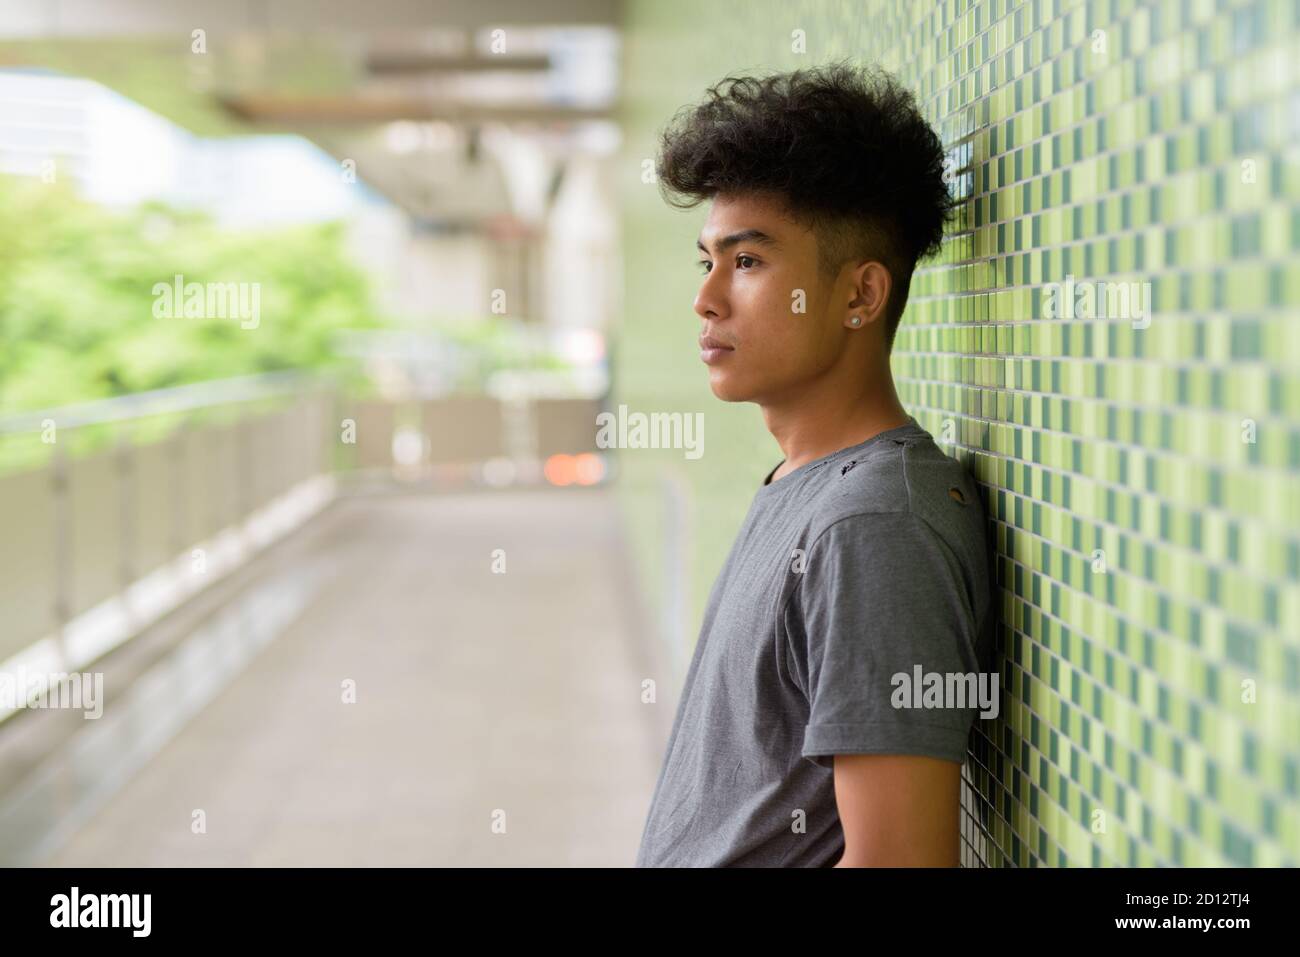 Profile view of young Asian man with curly hair at footbridge in the city Stock Photo